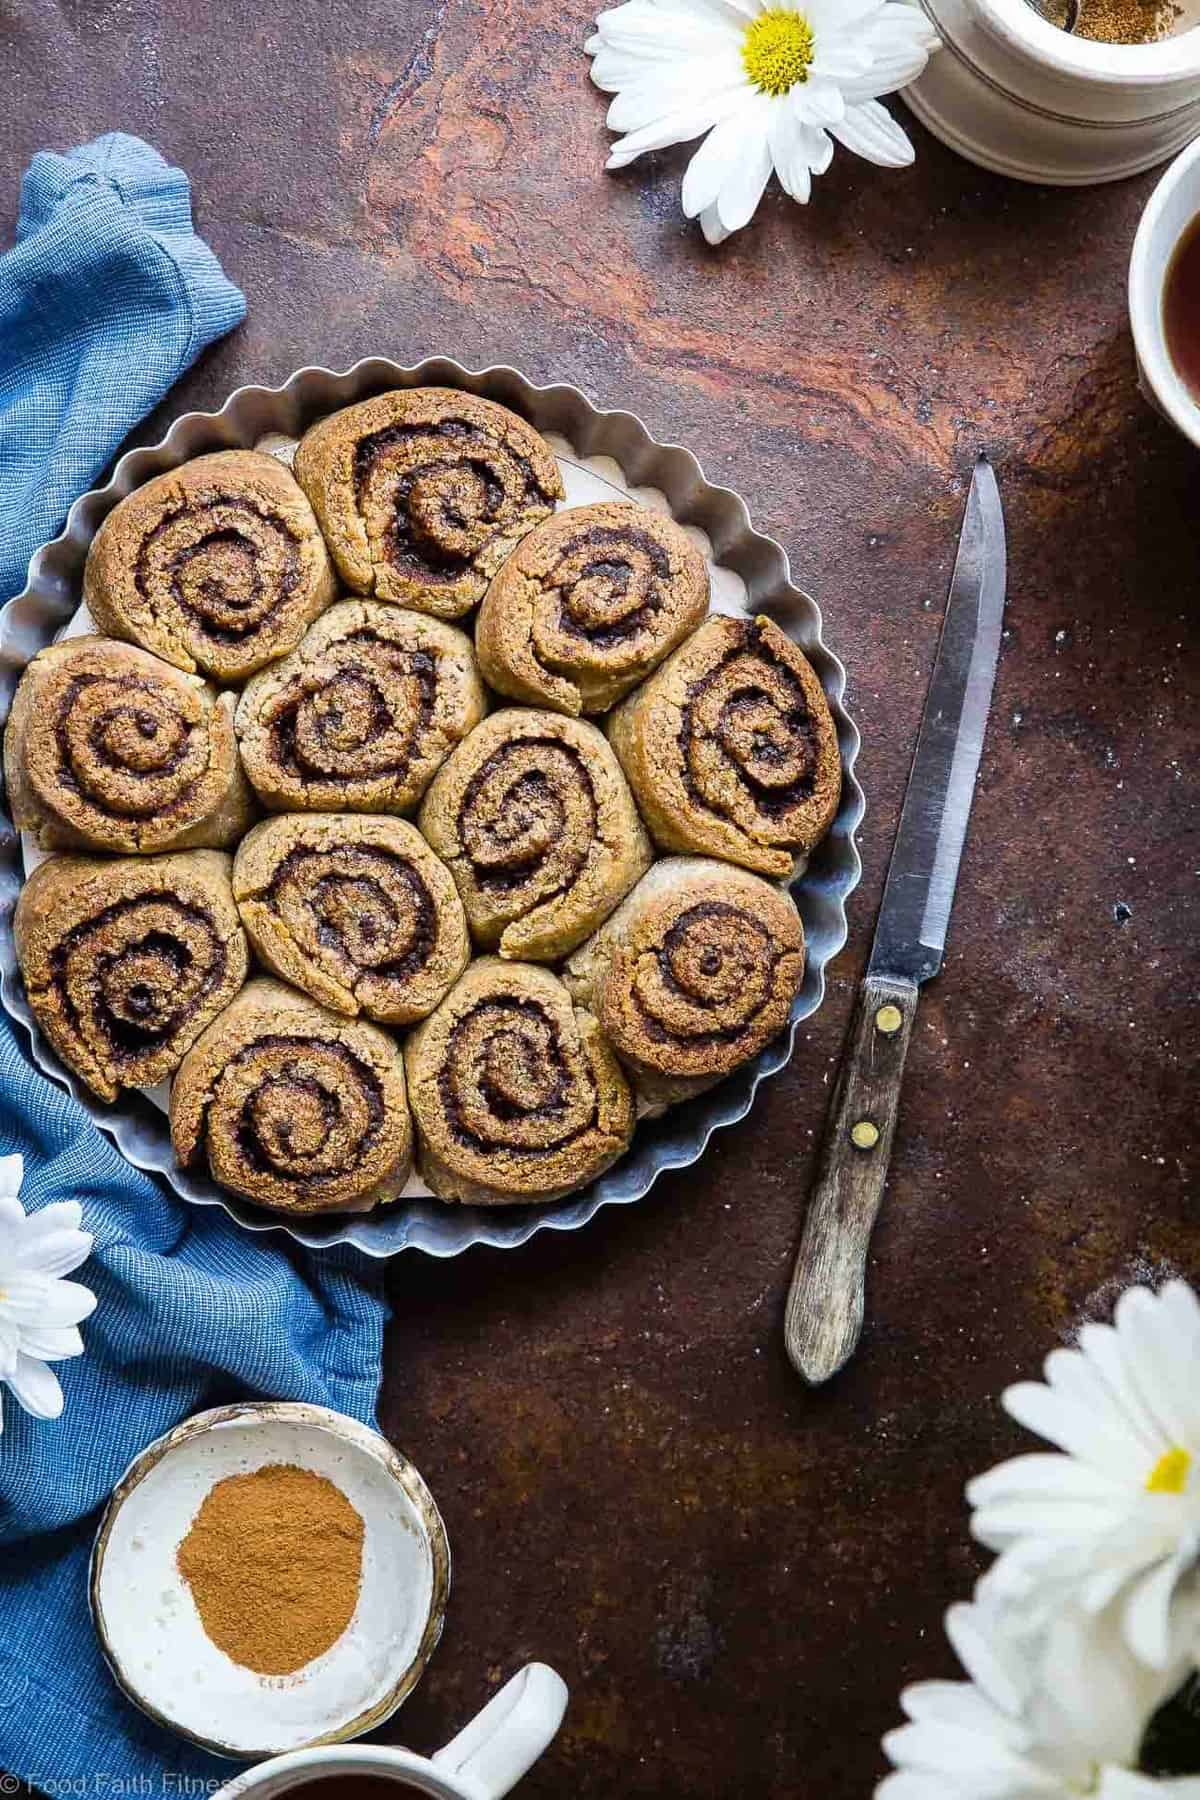 The Best Almond Flour Paleo Cinnamon Rolls - These gluten free cinnamon rolls are a simple, wholesome remake of the classic baked good that you can't even tell is healthy, and gluten/dairy free! SO soft, fluffy and YUMMY! | #Foodfaithfitness | #Paleo #Glutenfree #Healthy #Dairyfree #Cinnamonrolls